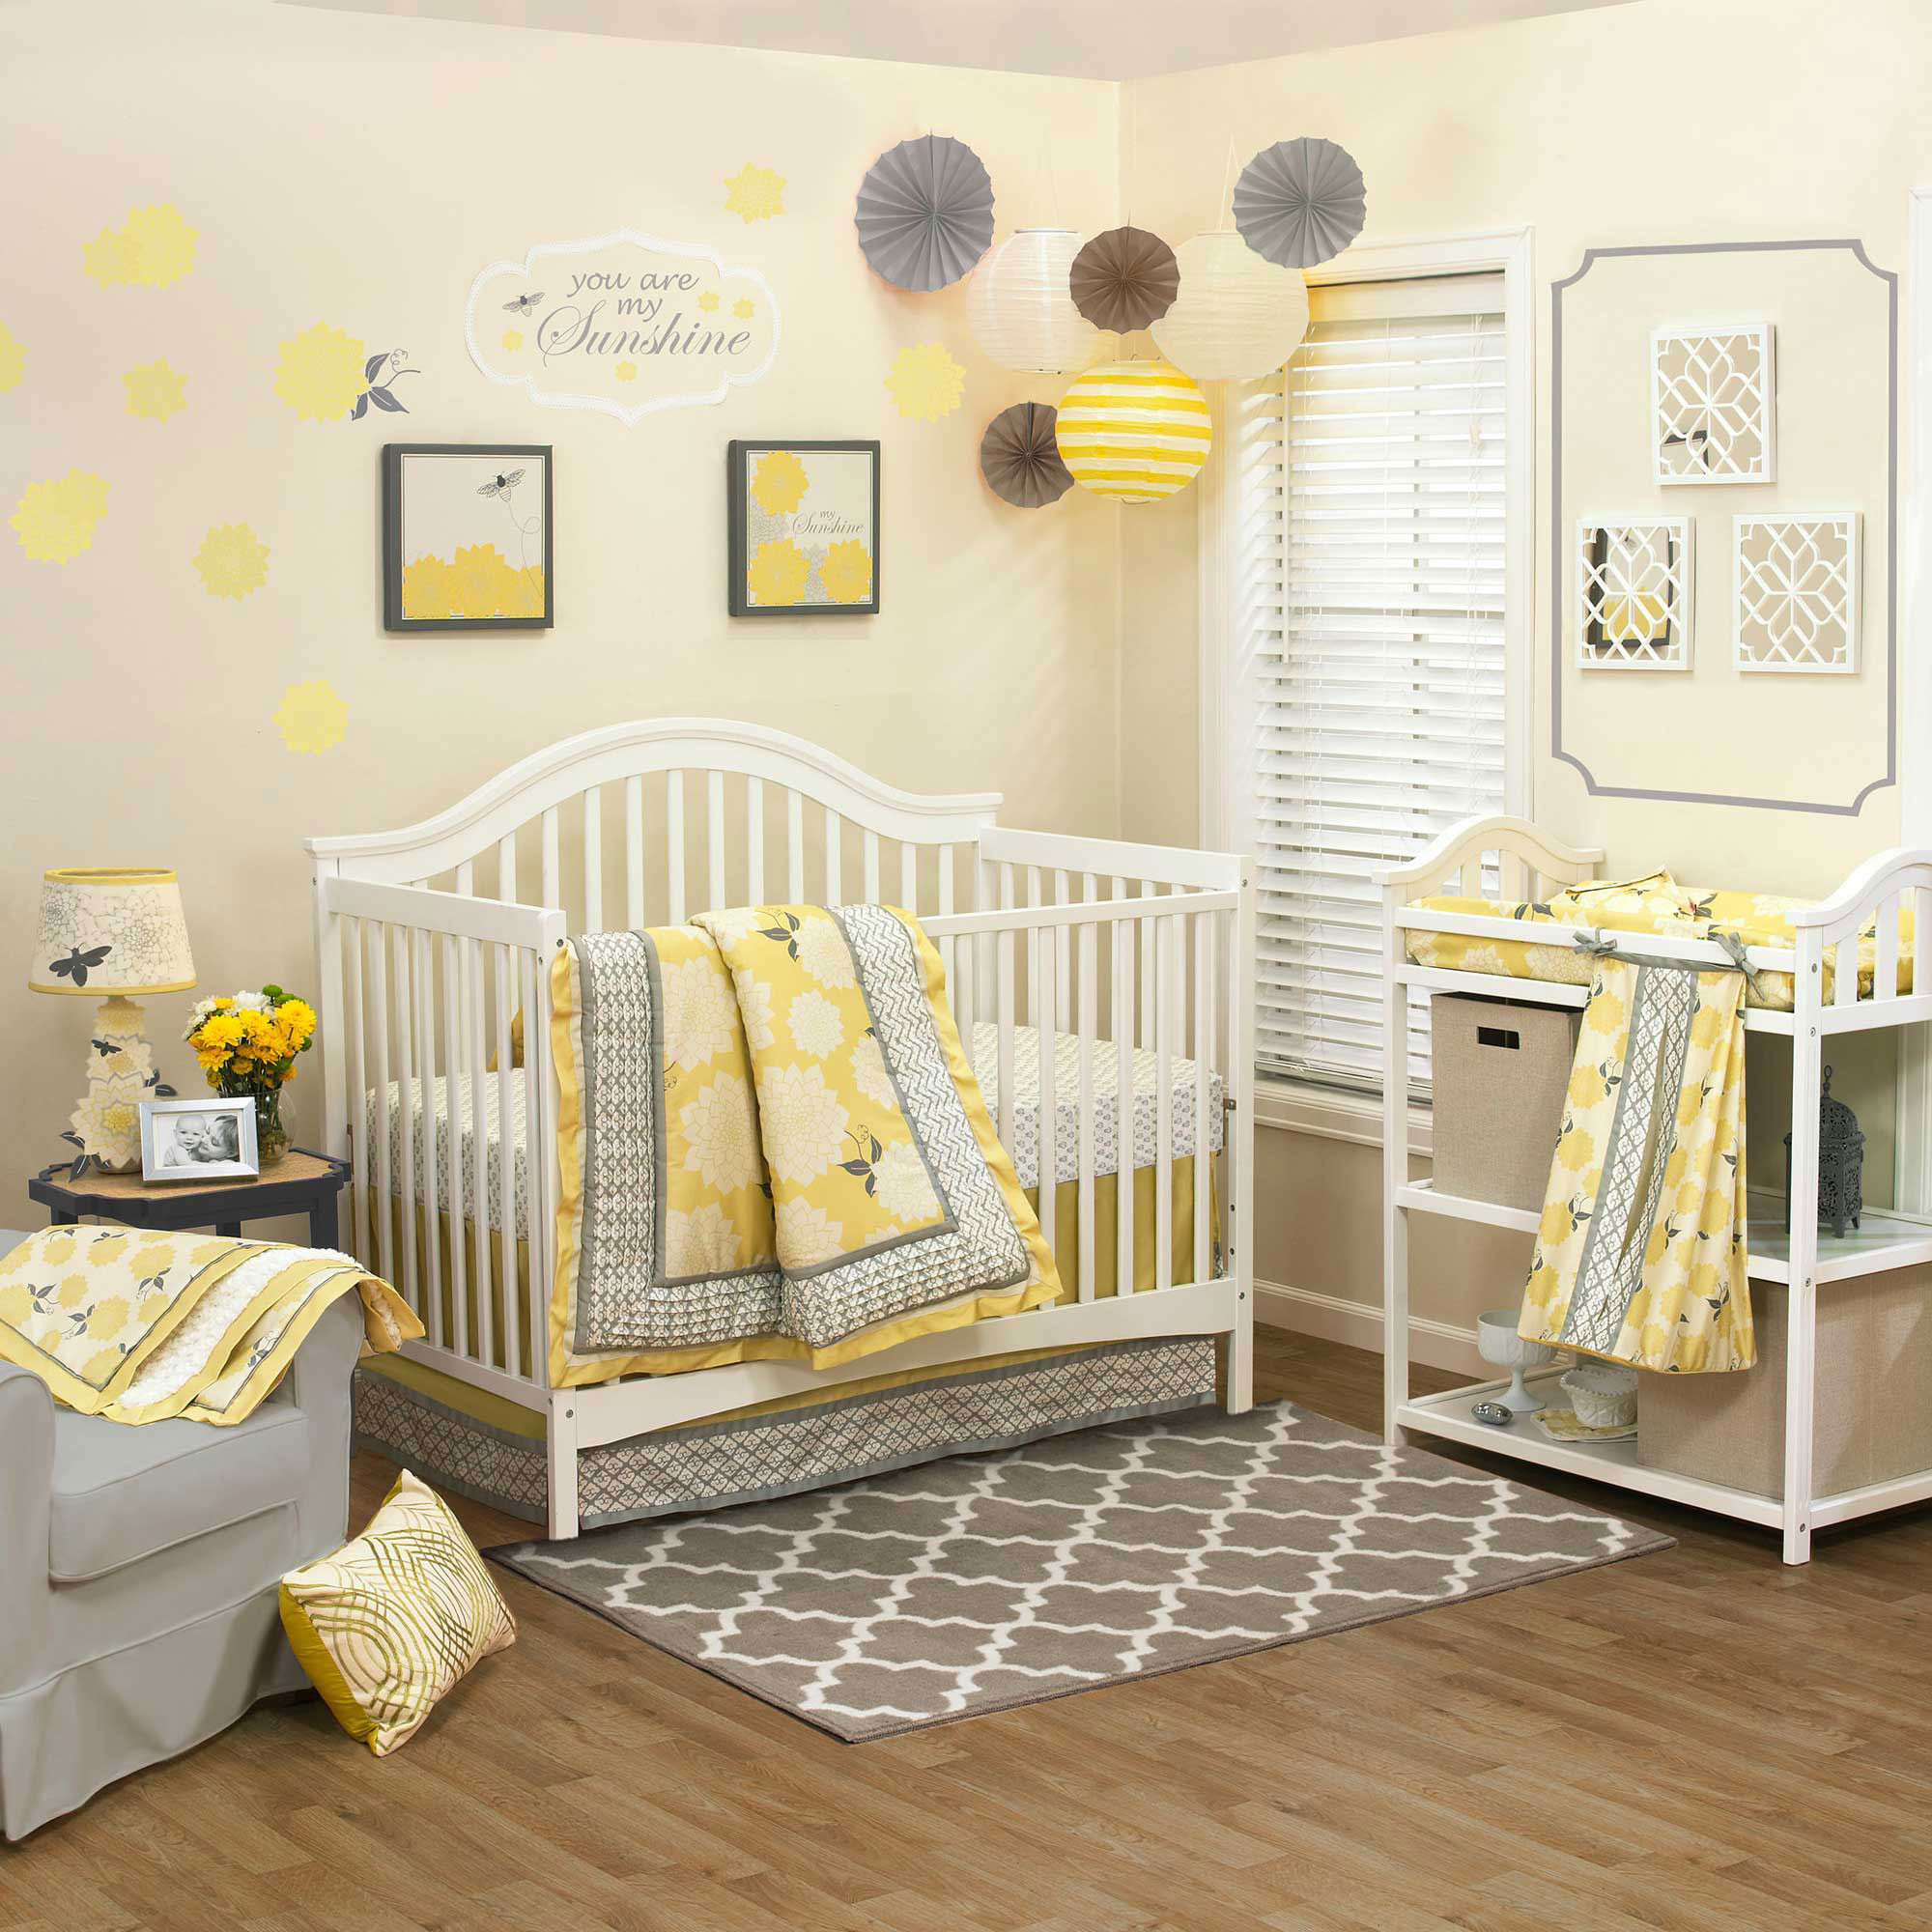 Room Decor For Baby Girls
 Baby Girl Nursery Ideas 10 Pretty Examples Decorating Room